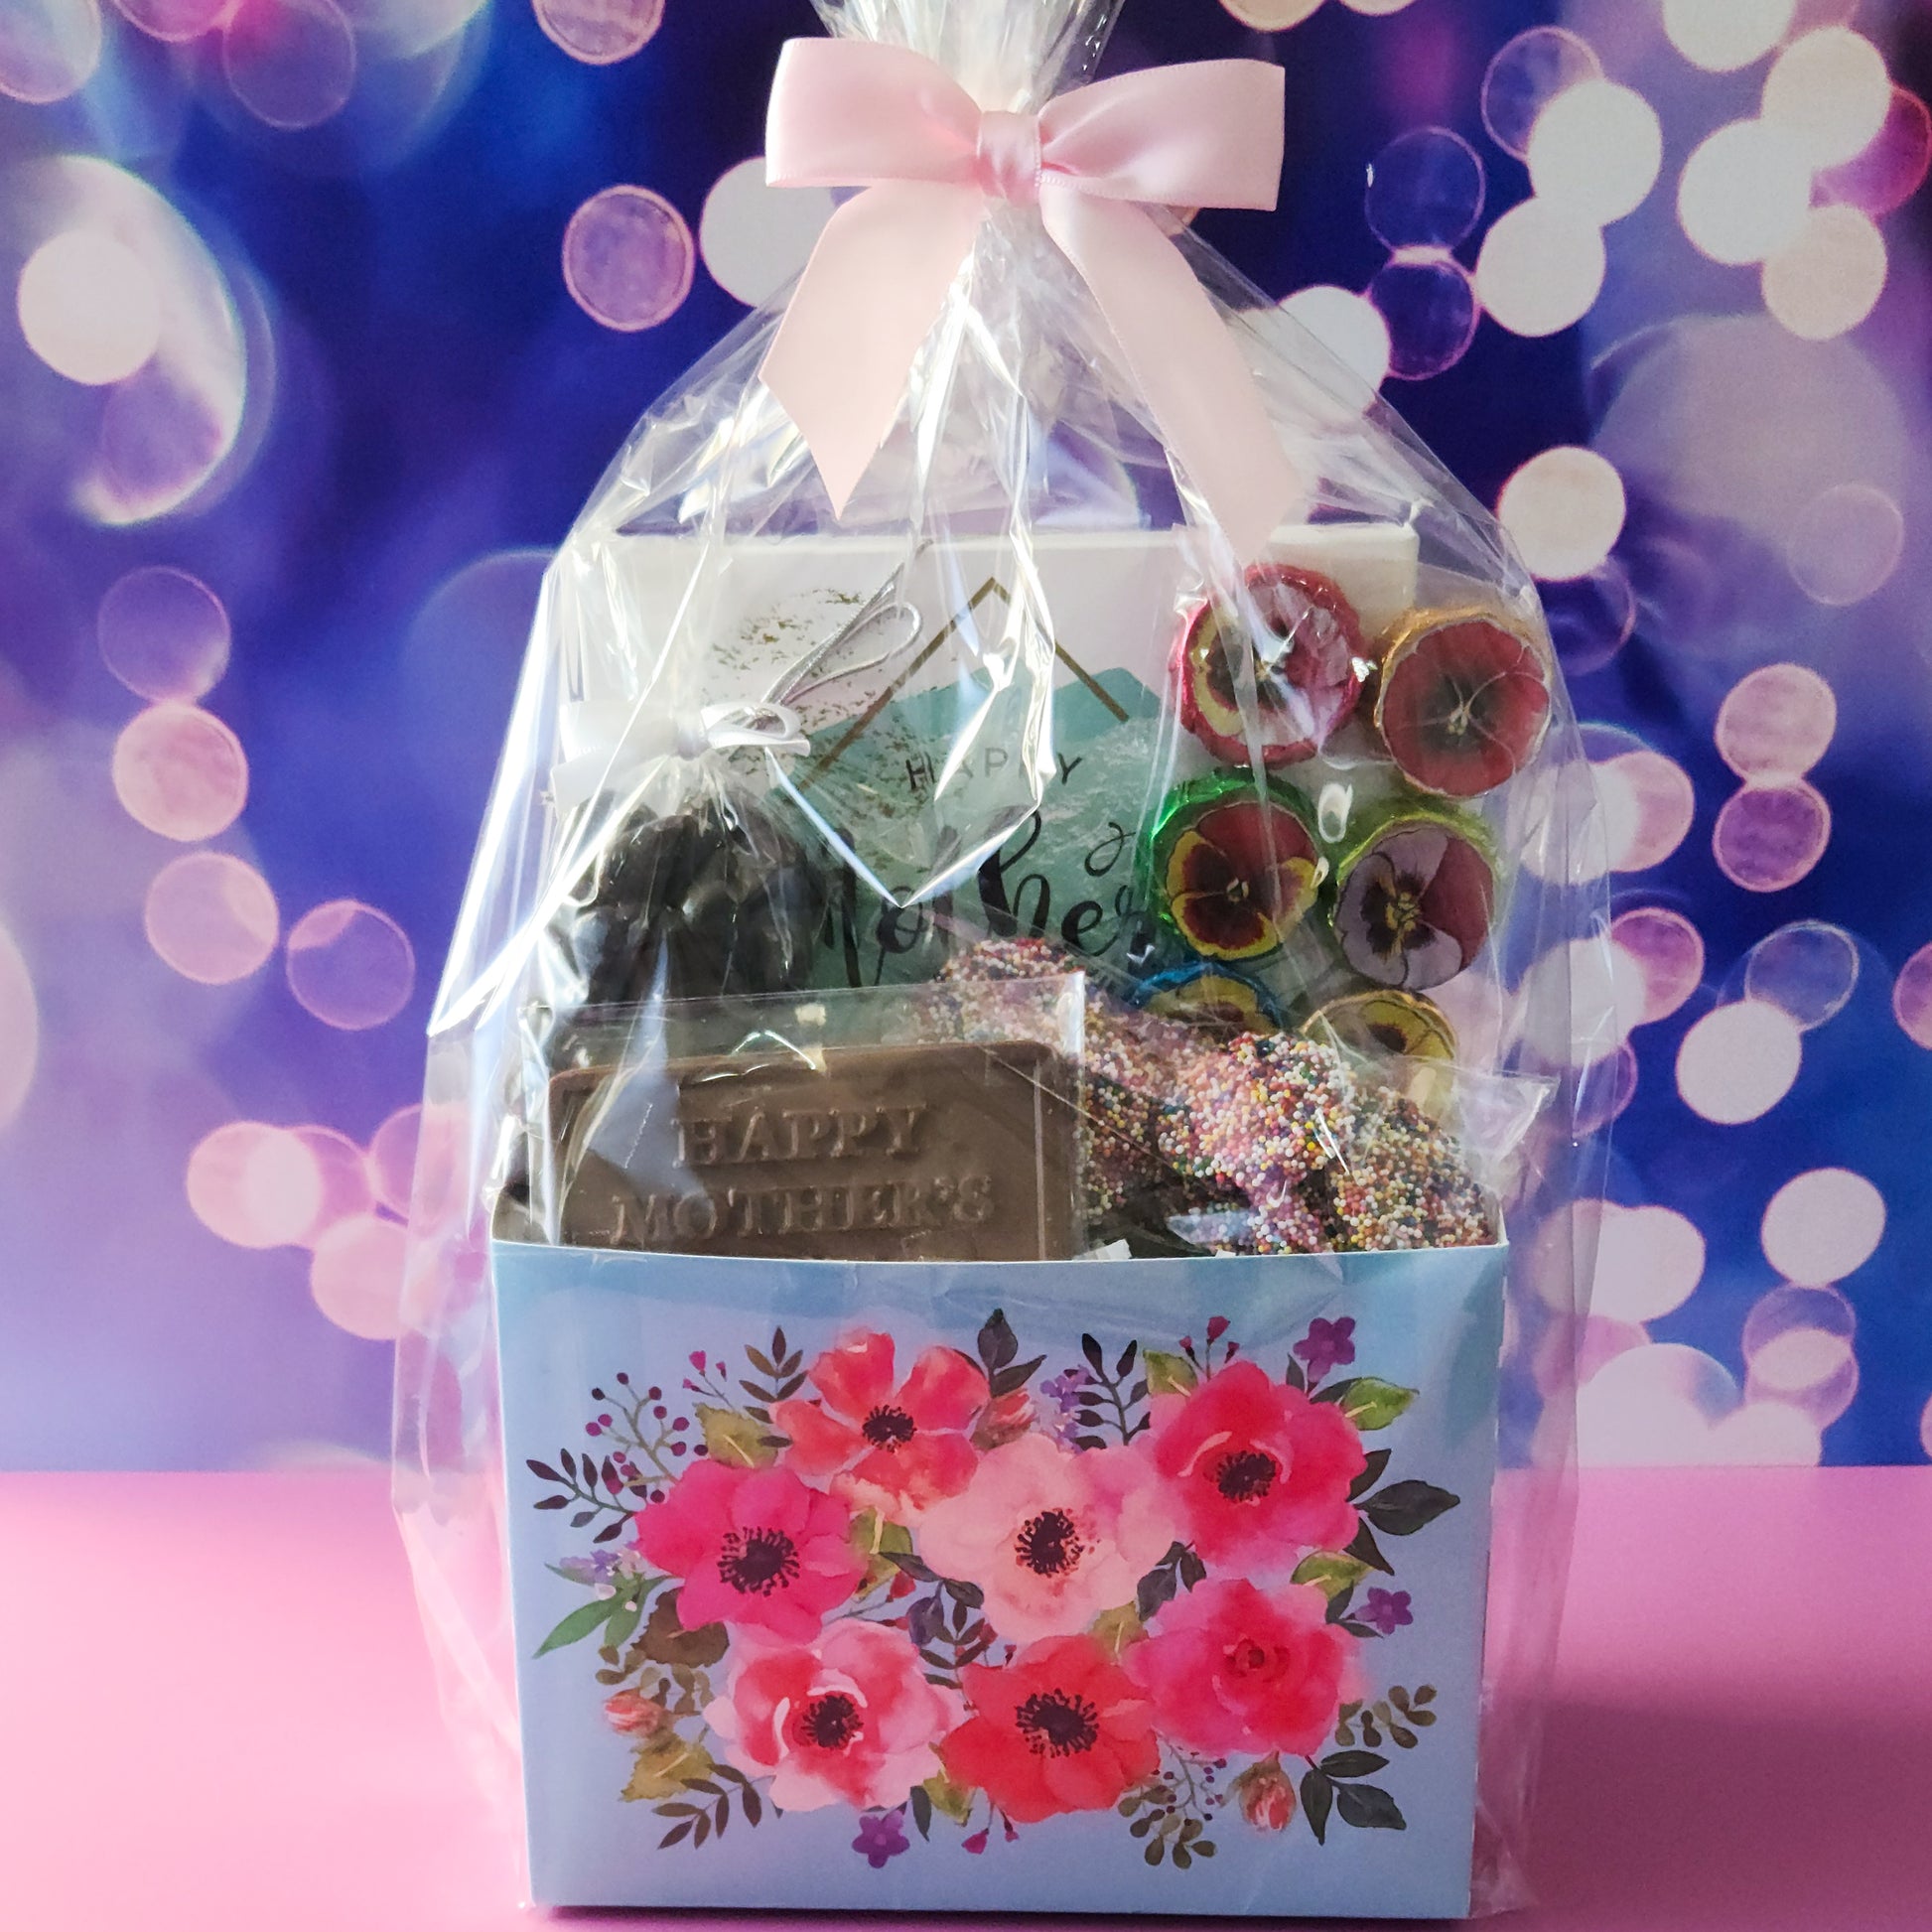 Chocolate is the gift mom really wants for Mother's Day! Our Chocolate gift basket is just the thing!